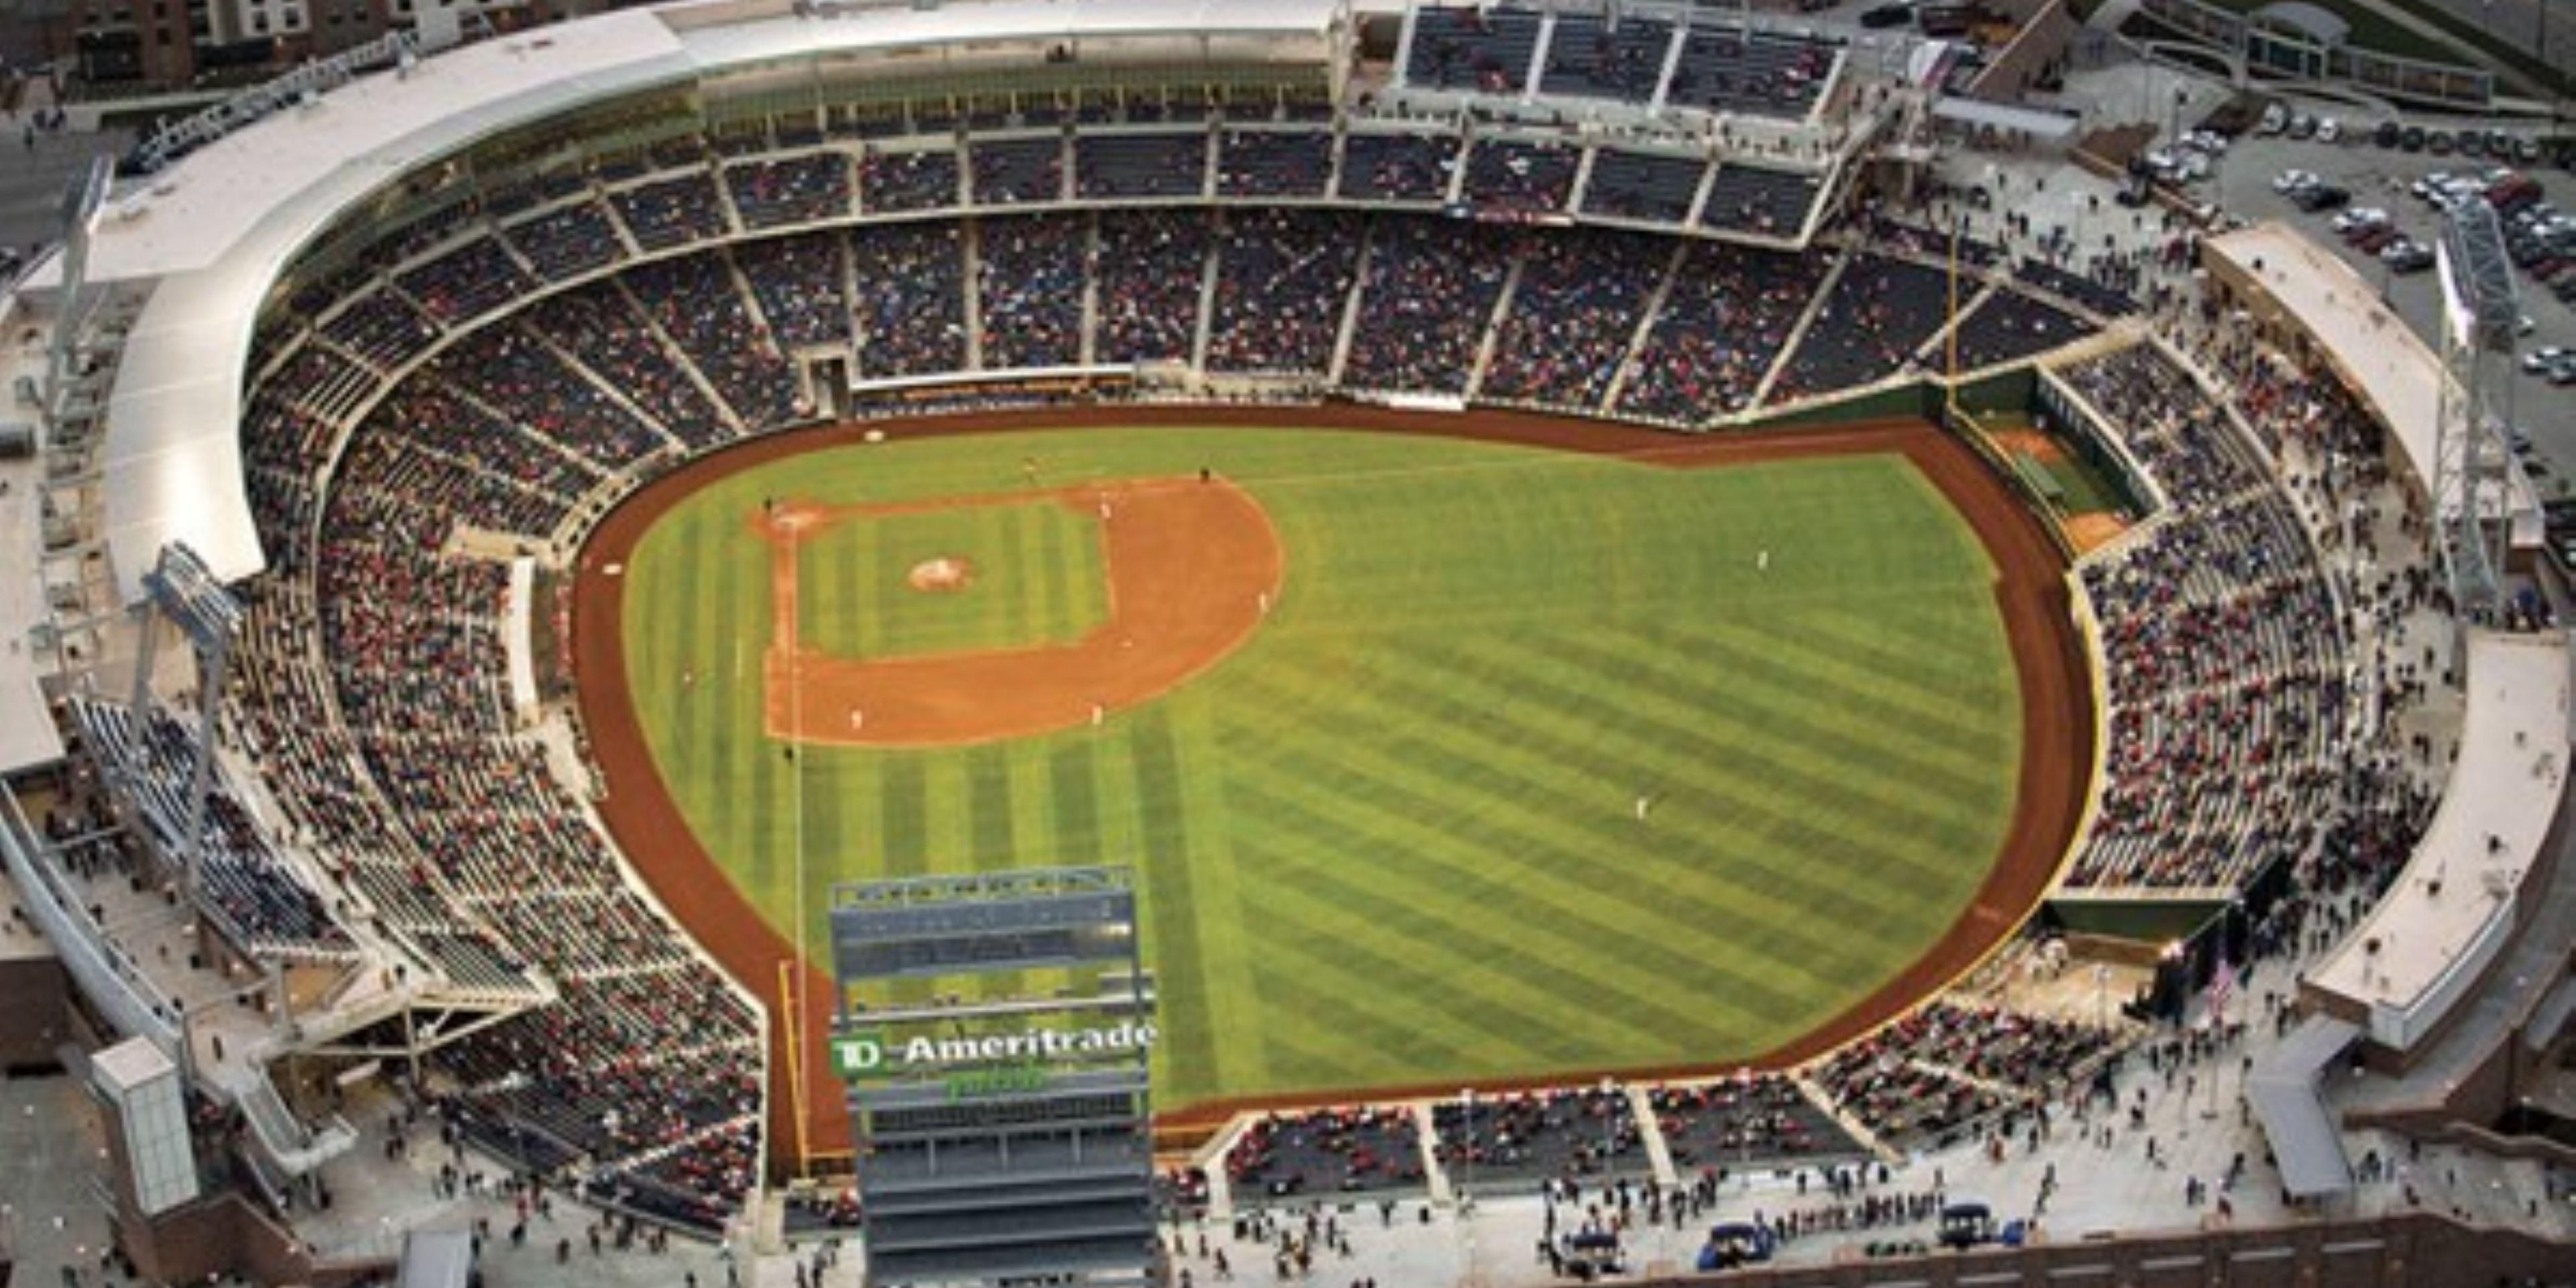 Home to the NCAA Men’s College World Series since 2011, the TD Ameritrade Park is located just 10 miles from the hotel. Whether you are a spectator, or travelling with a Triple Crown Baseball Team, the Holiday Inn Express & Suites Omaha - 120th and Maple is a great choice for your hotel accommodations. 